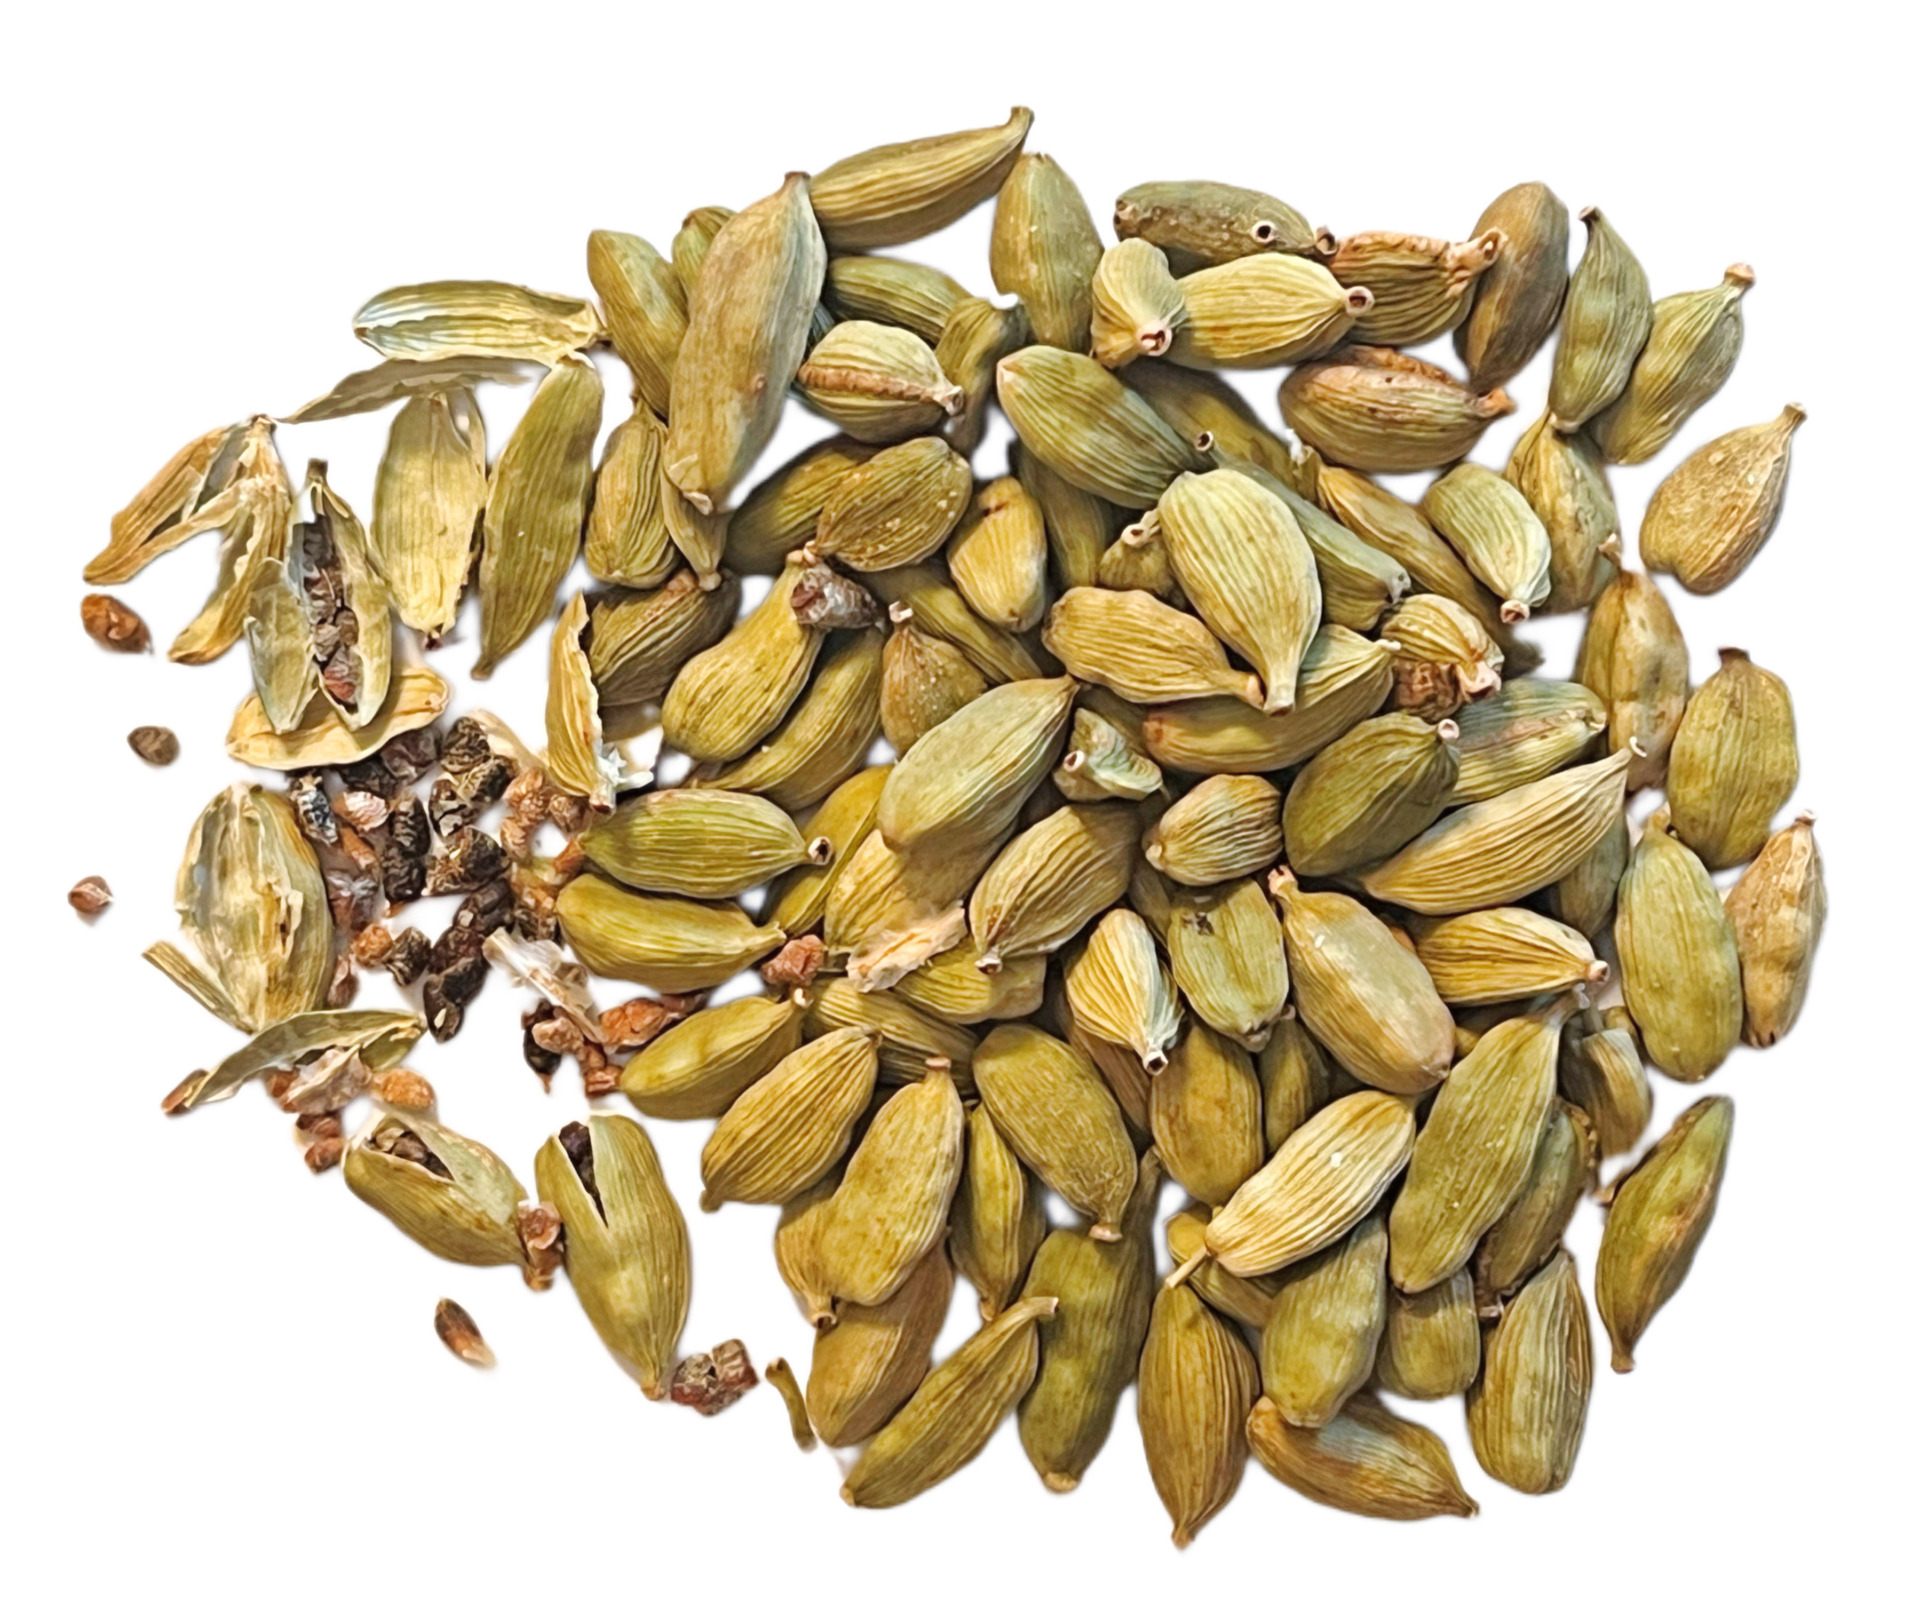 Cardamom has shown a range of health benefits, including weight loss and reducing inflammation. (Texas A&M AgriLife Courtesy photo)